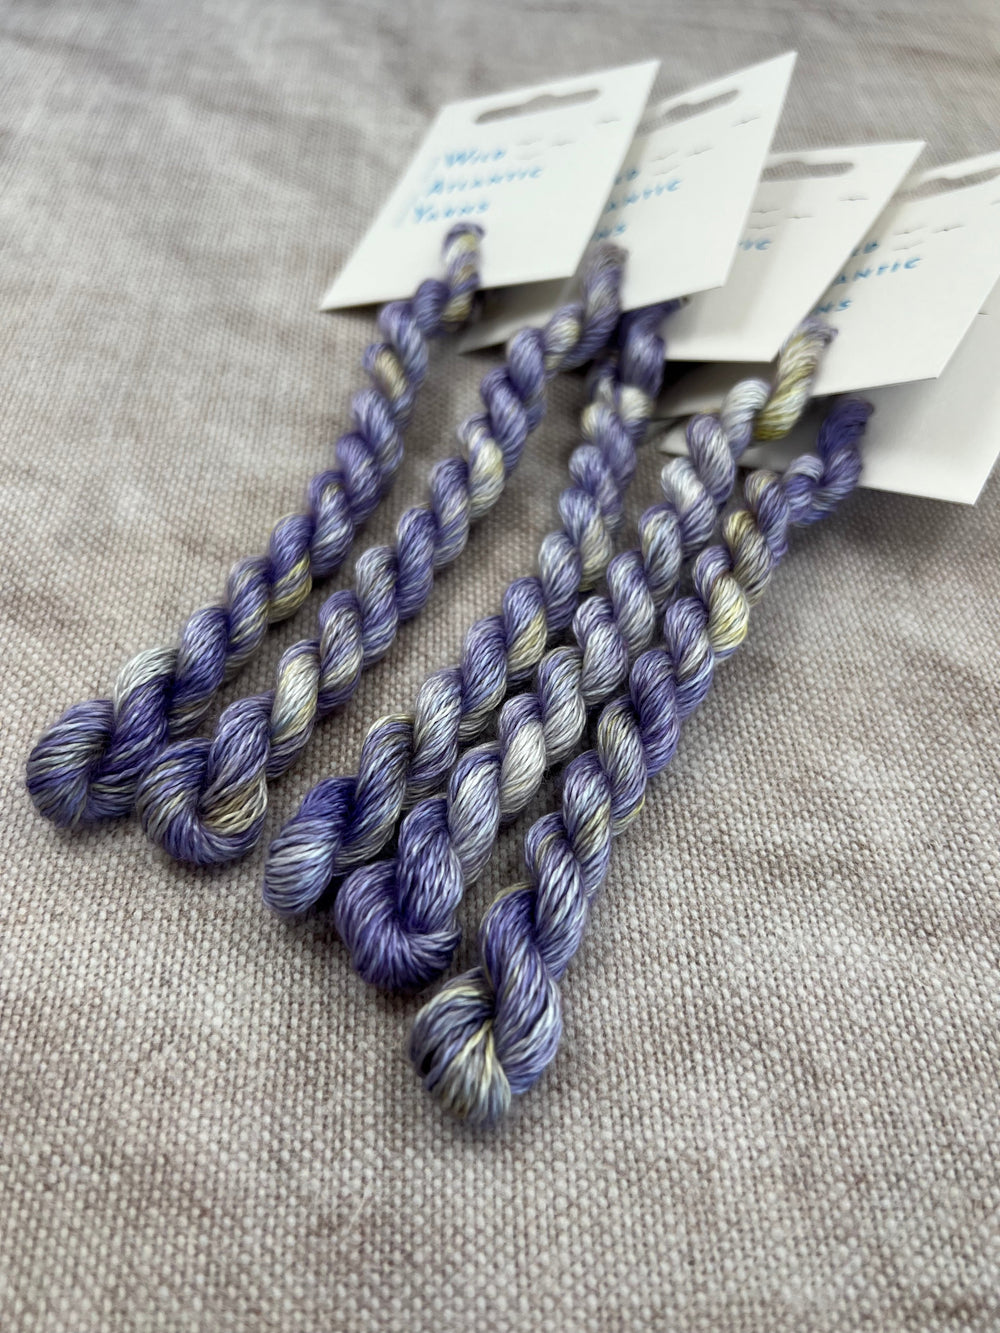 EMBROIDERY THREAD: Forget - me - not - EMBROIDERY THREAD - Wild Atlantic Yarns